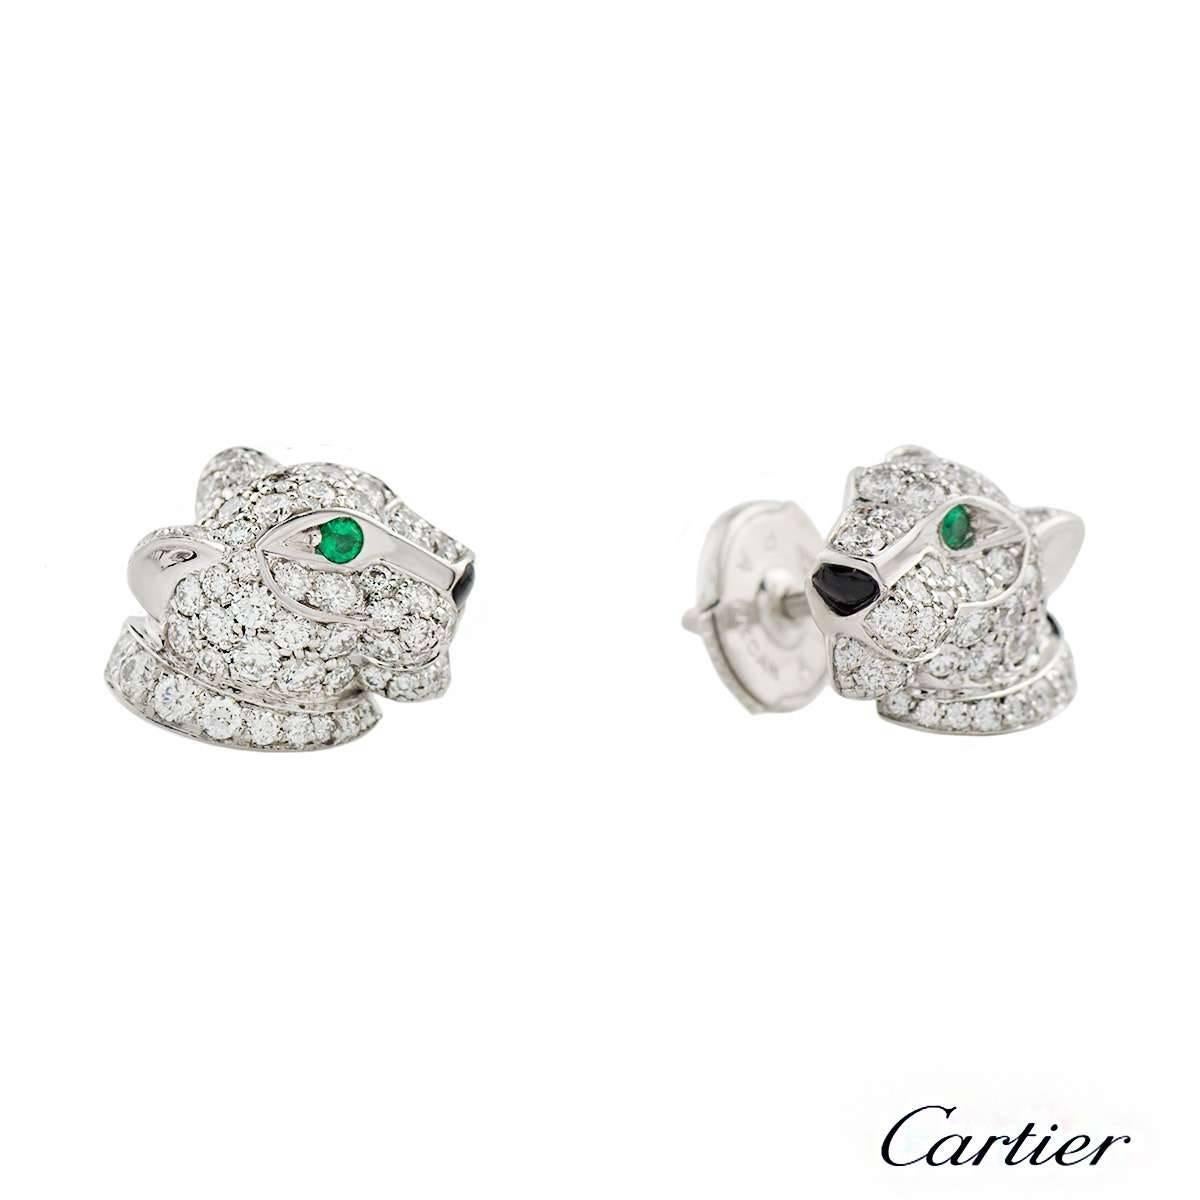 A delightful pair of Cartier 18k gold diamond, emerald and onyx earrings from the Panthere de Cartier collection. The earrings comprise of the panthere motif encrusted with 63 round brilliant cut diamonds in each with an onyx for the nose and